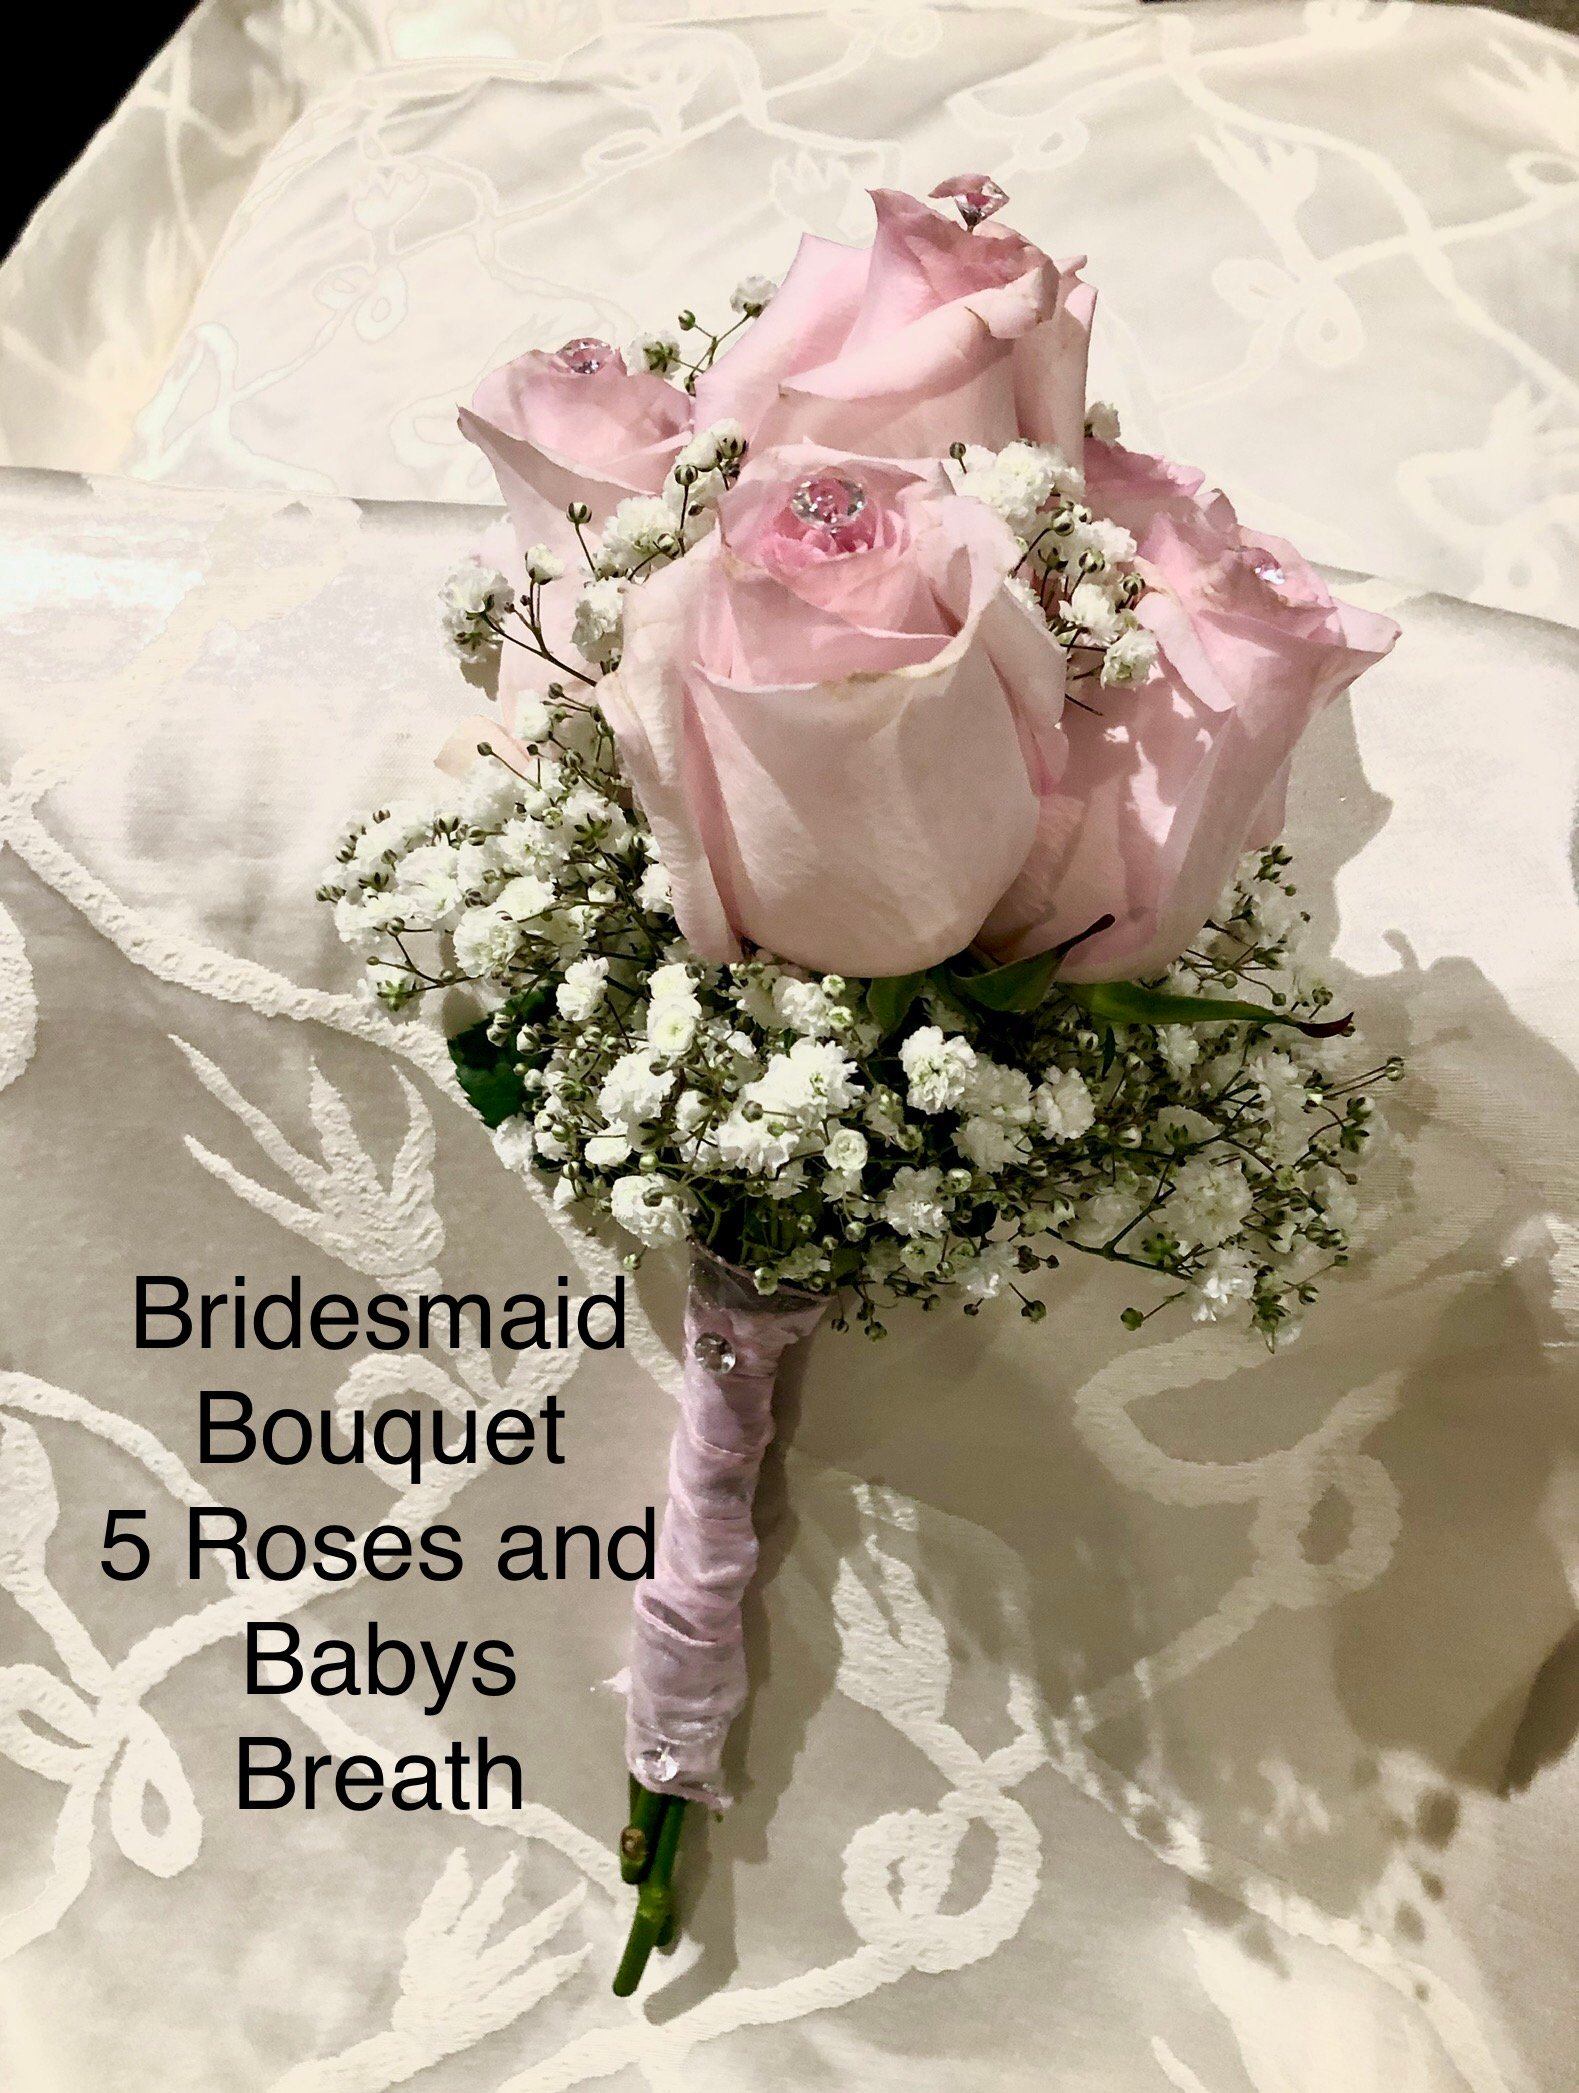 $40 Bridesmaid Bouquet 5 Roses and Babies Breath 